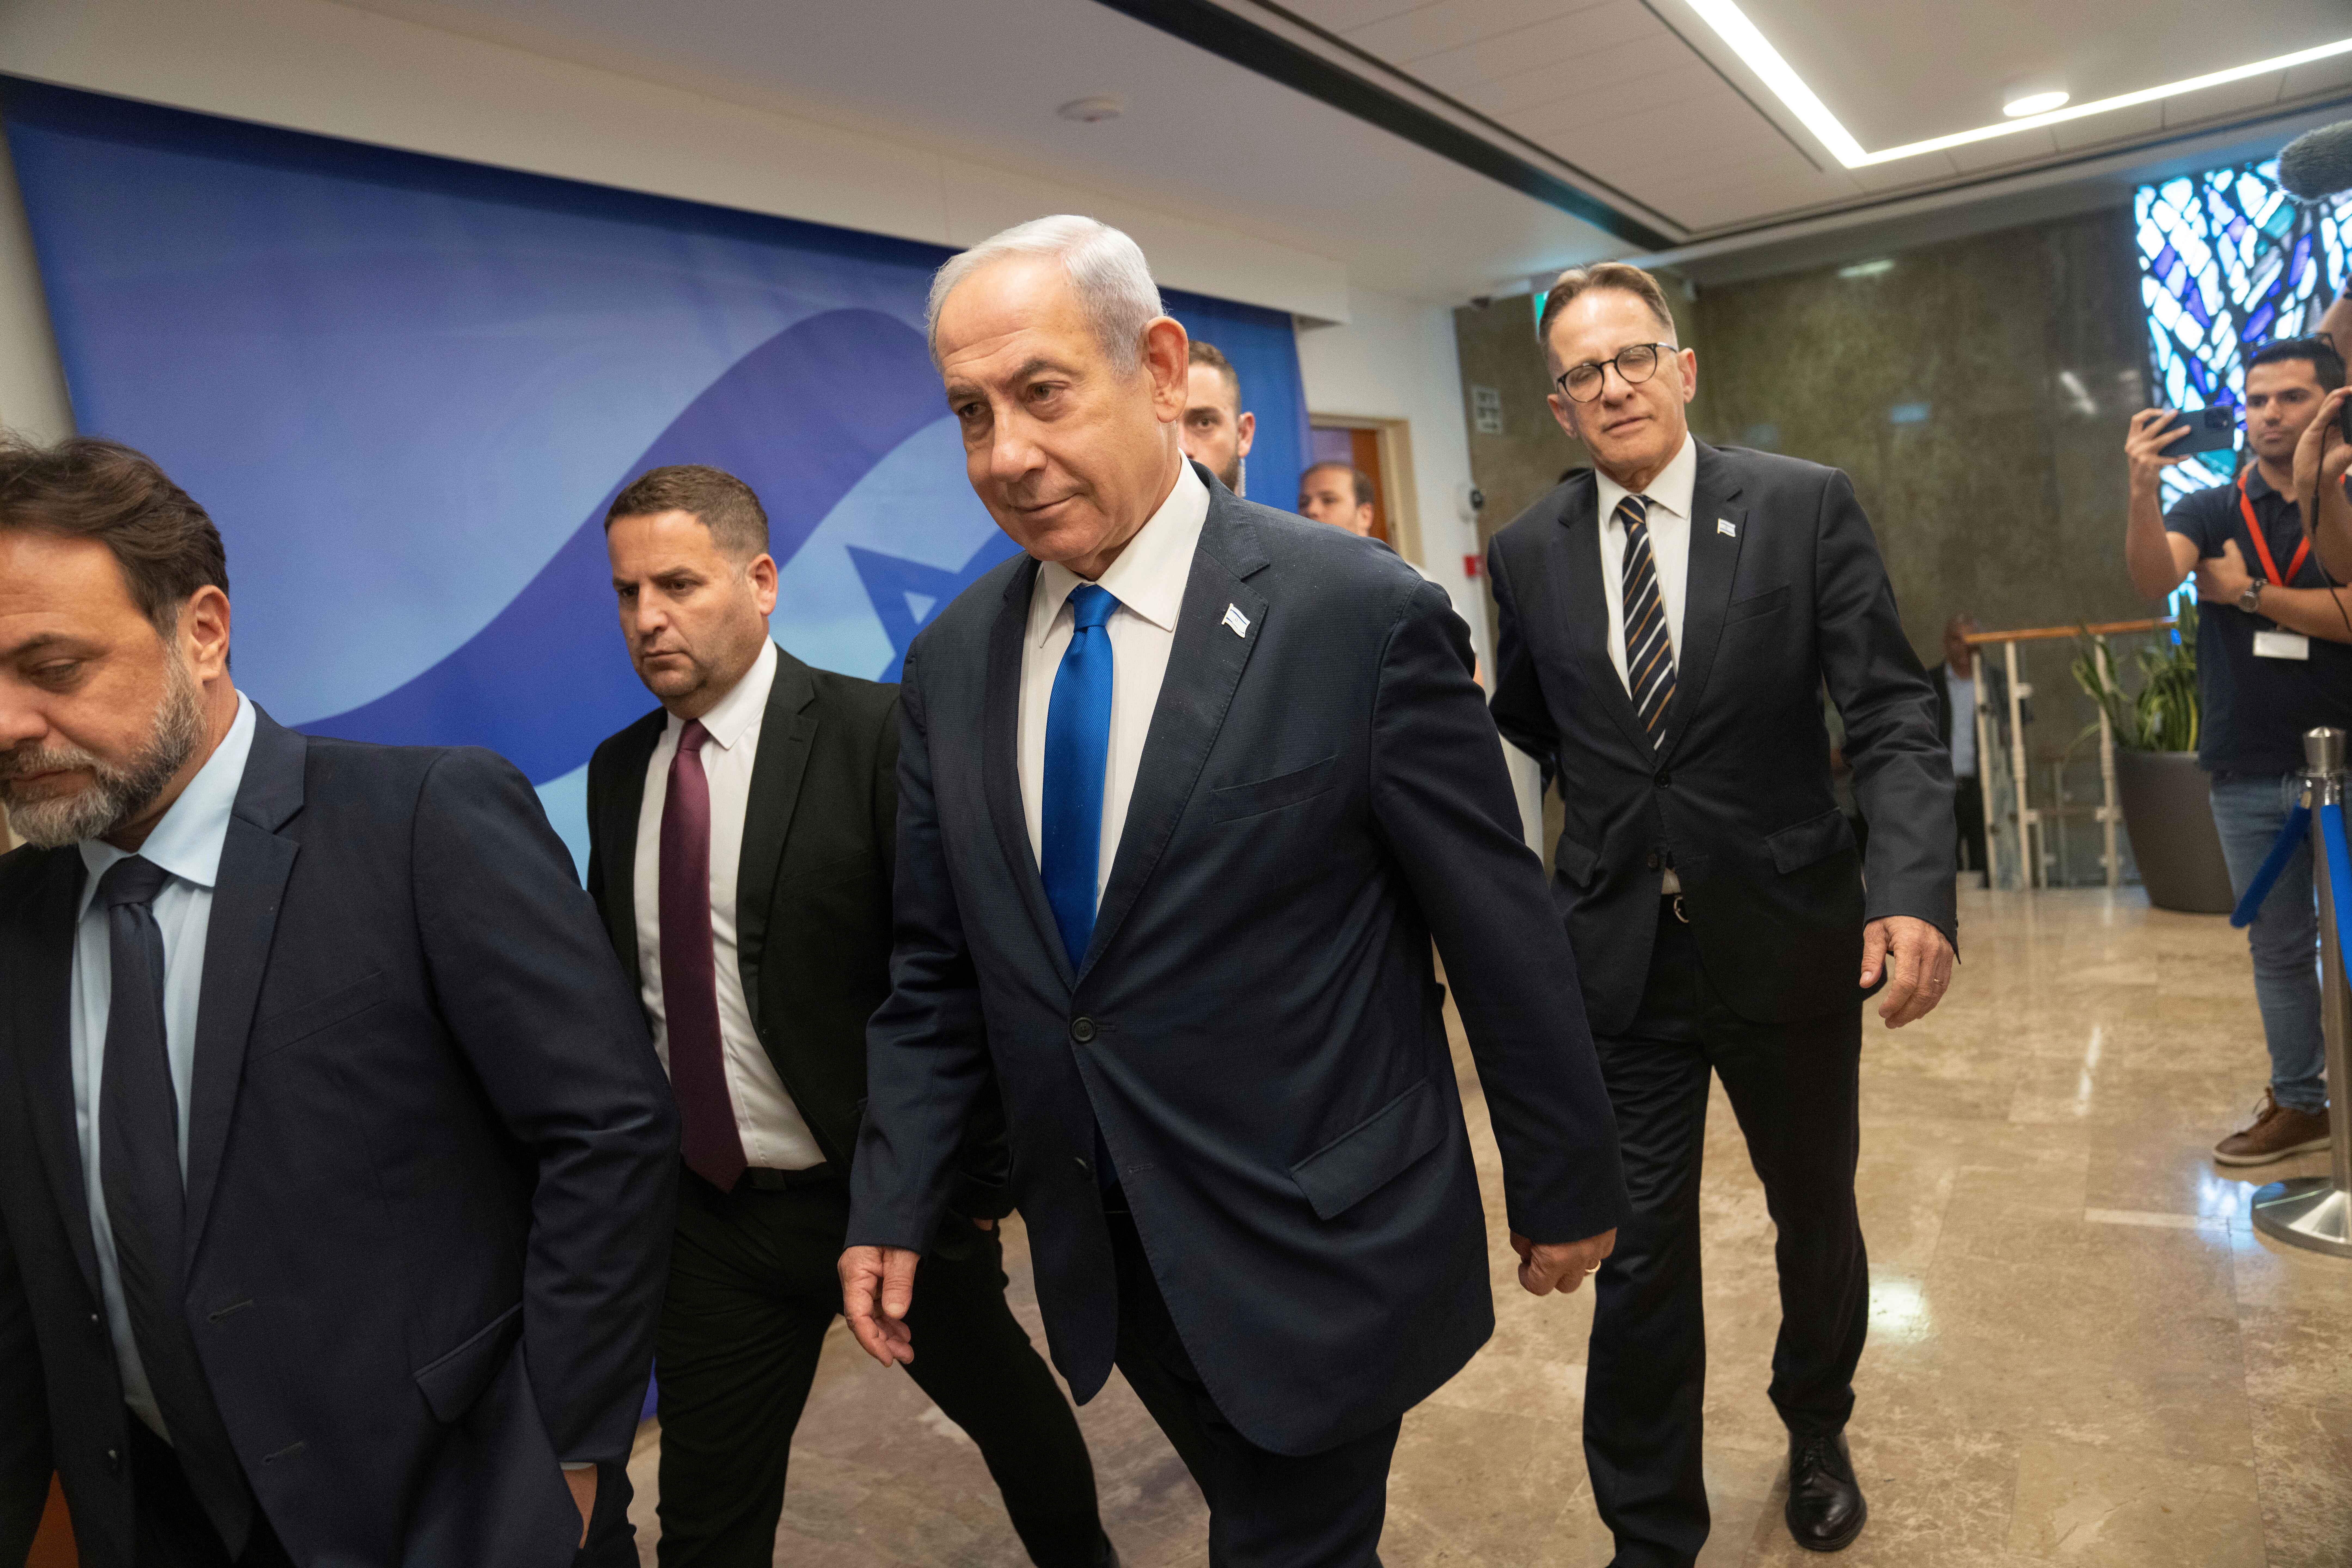 The Supreme Court of Israel has opened hearings on a case regarding a highly controversial Netanyahu law that effectively overhauled the Israeli judicial system